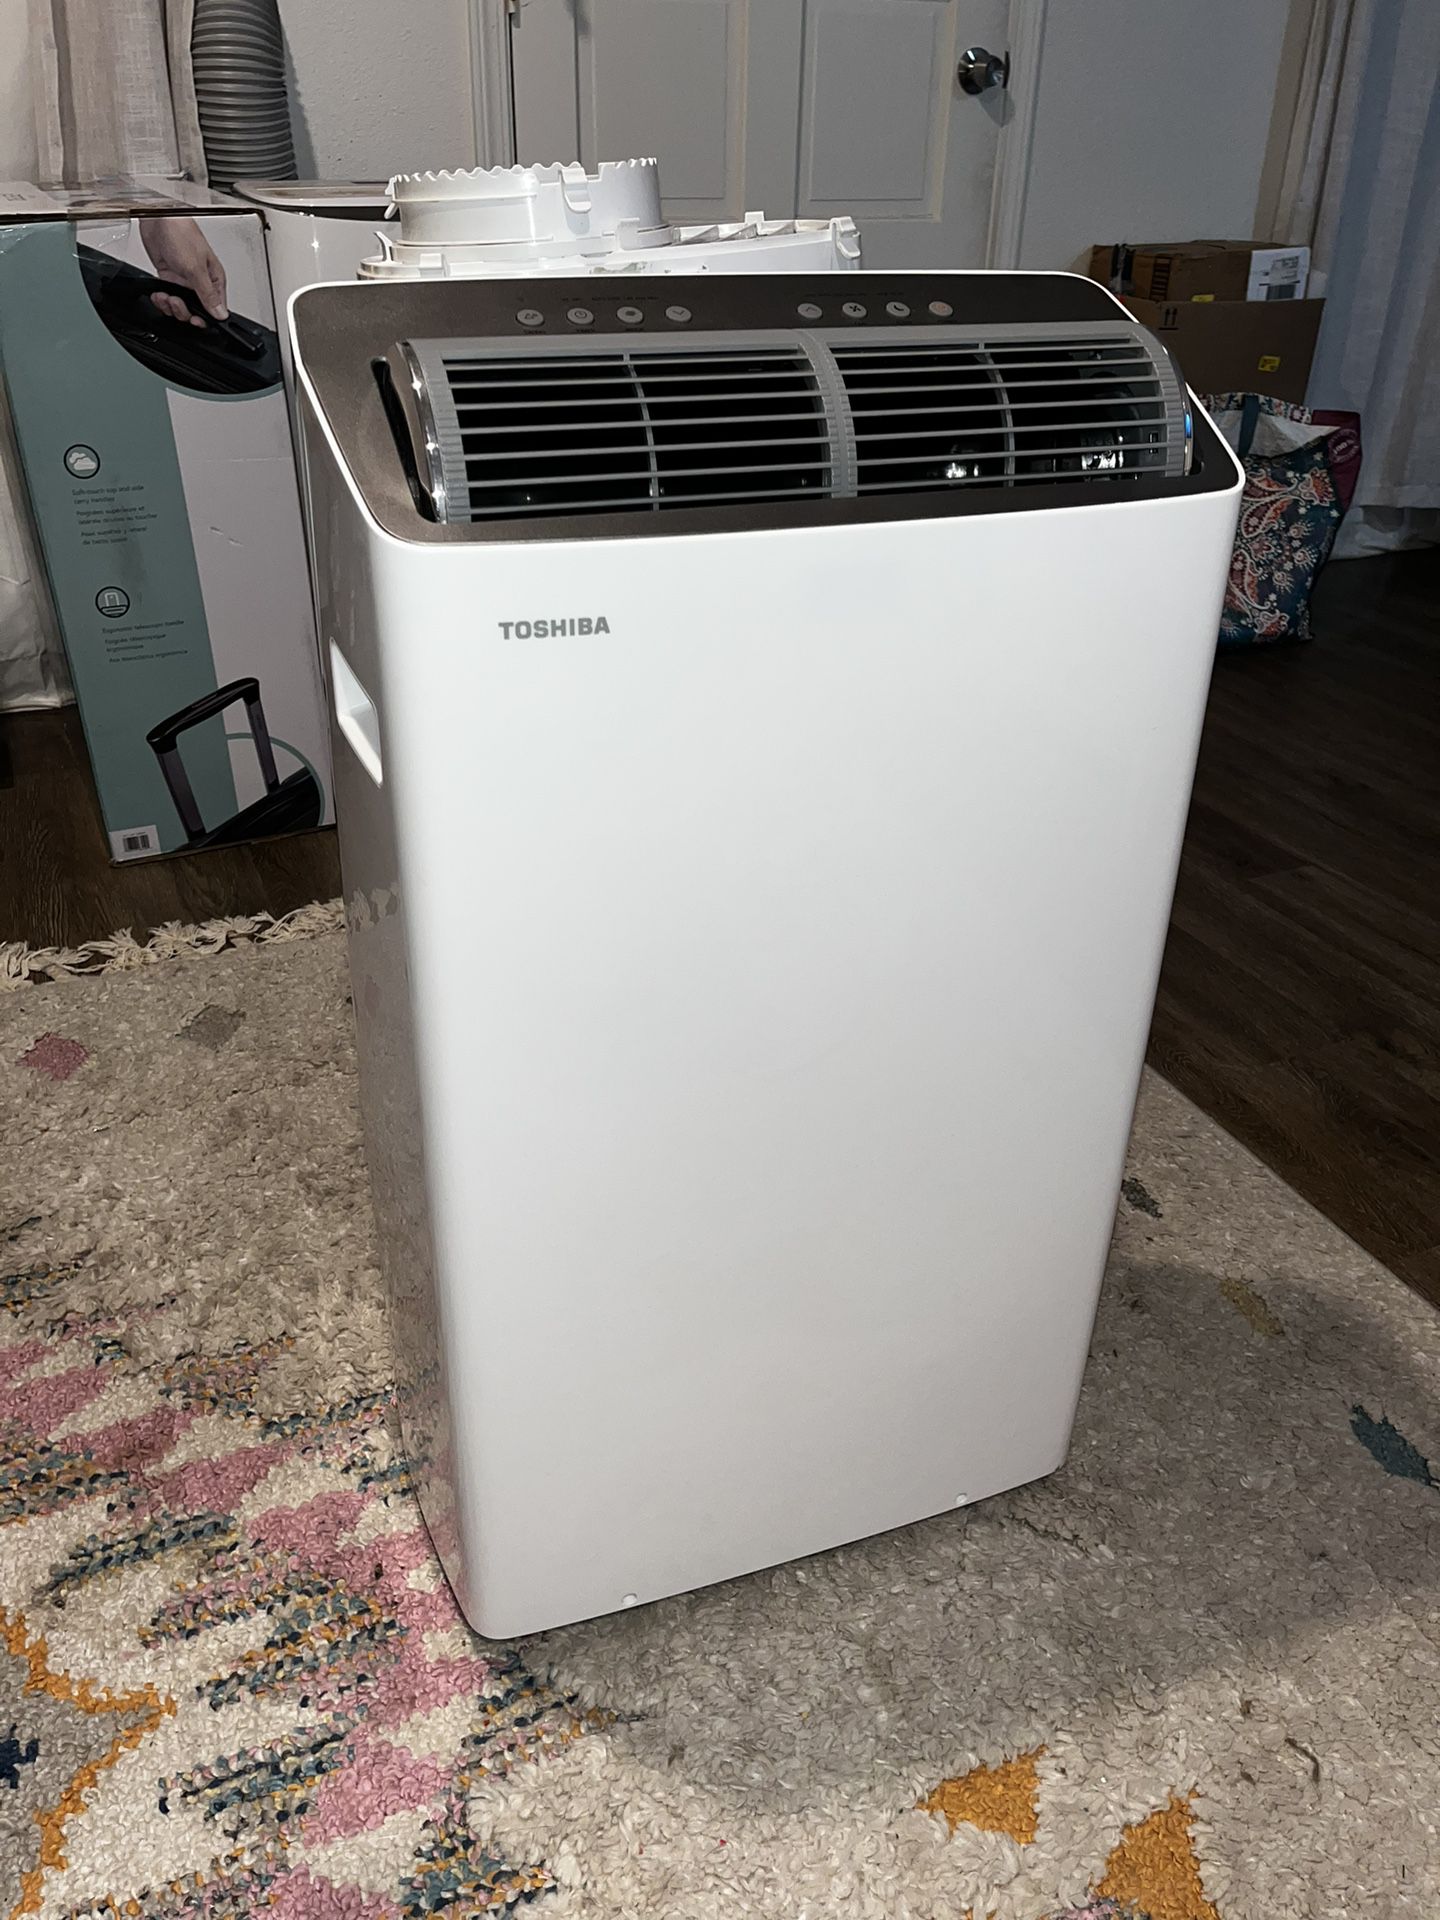 Portable Air Conditioner with Heat - Toshiba 14,000 BTU (up to 550 sqft). Pick up in OB by 5/15. 